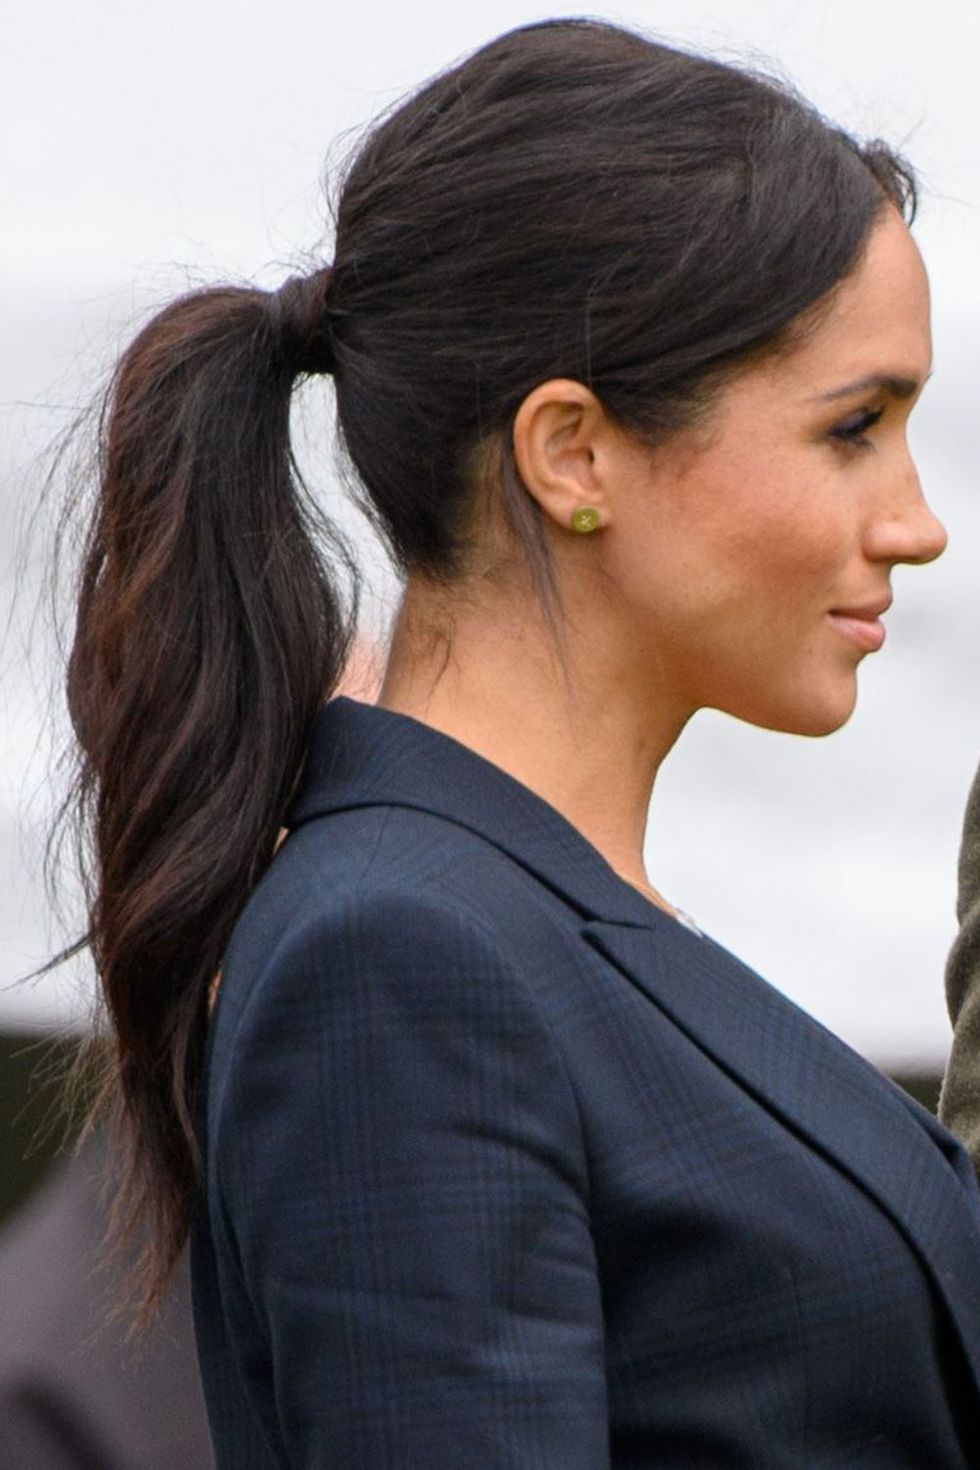 duchess of sussex royal tour hairstyles   meghan markle's ponytail